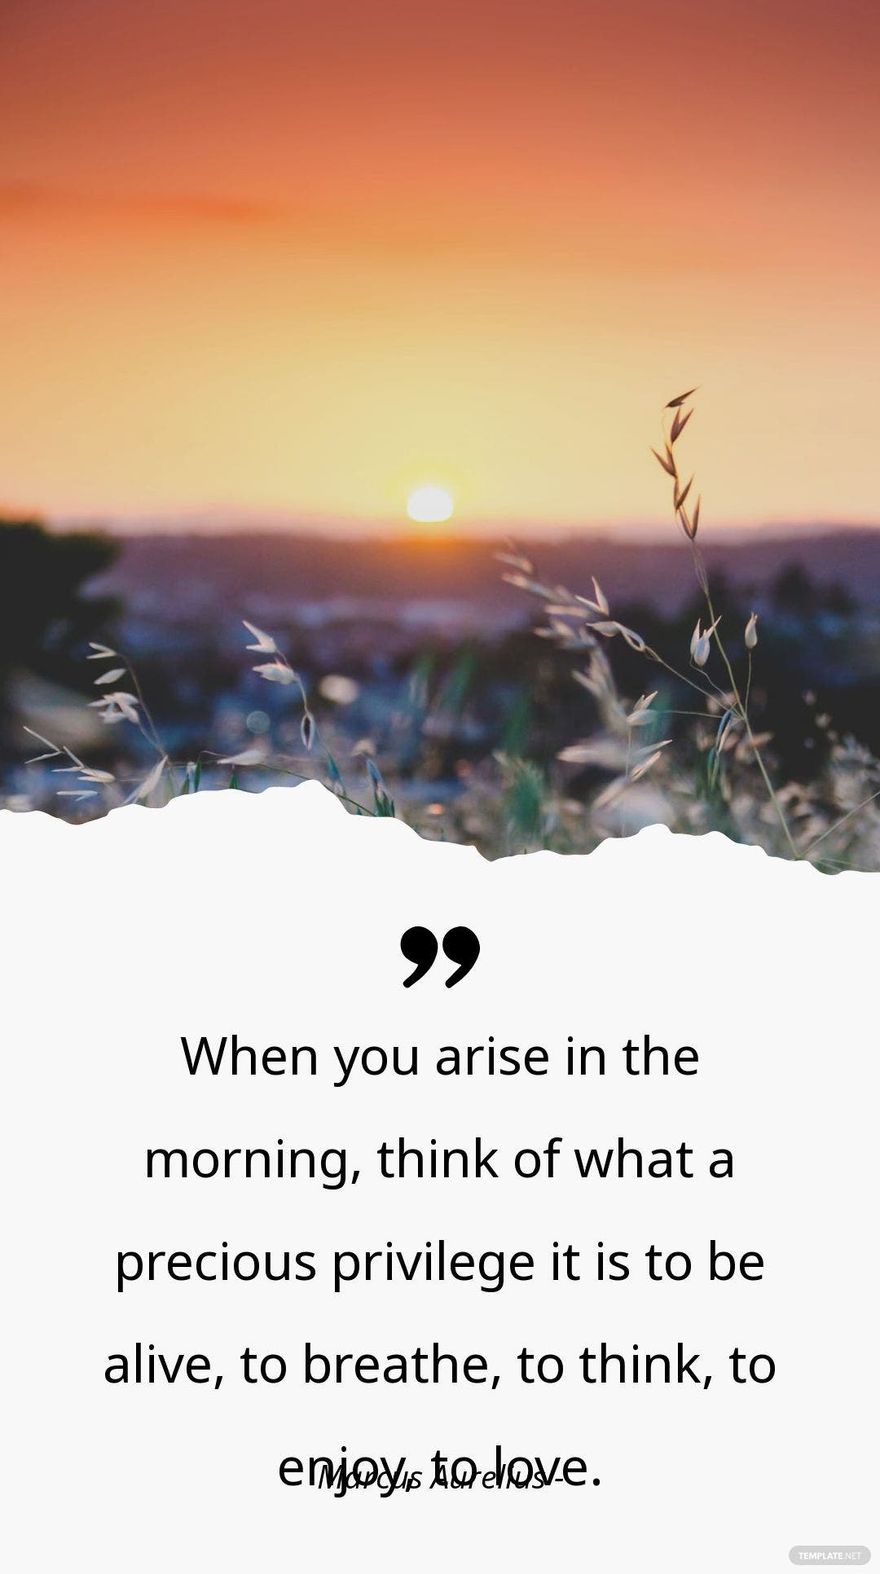 Marcus Aurelius - When you arise in the morning, think of what a precious privilege it is to be alive, to breathe, to think, to enjoy, to love.